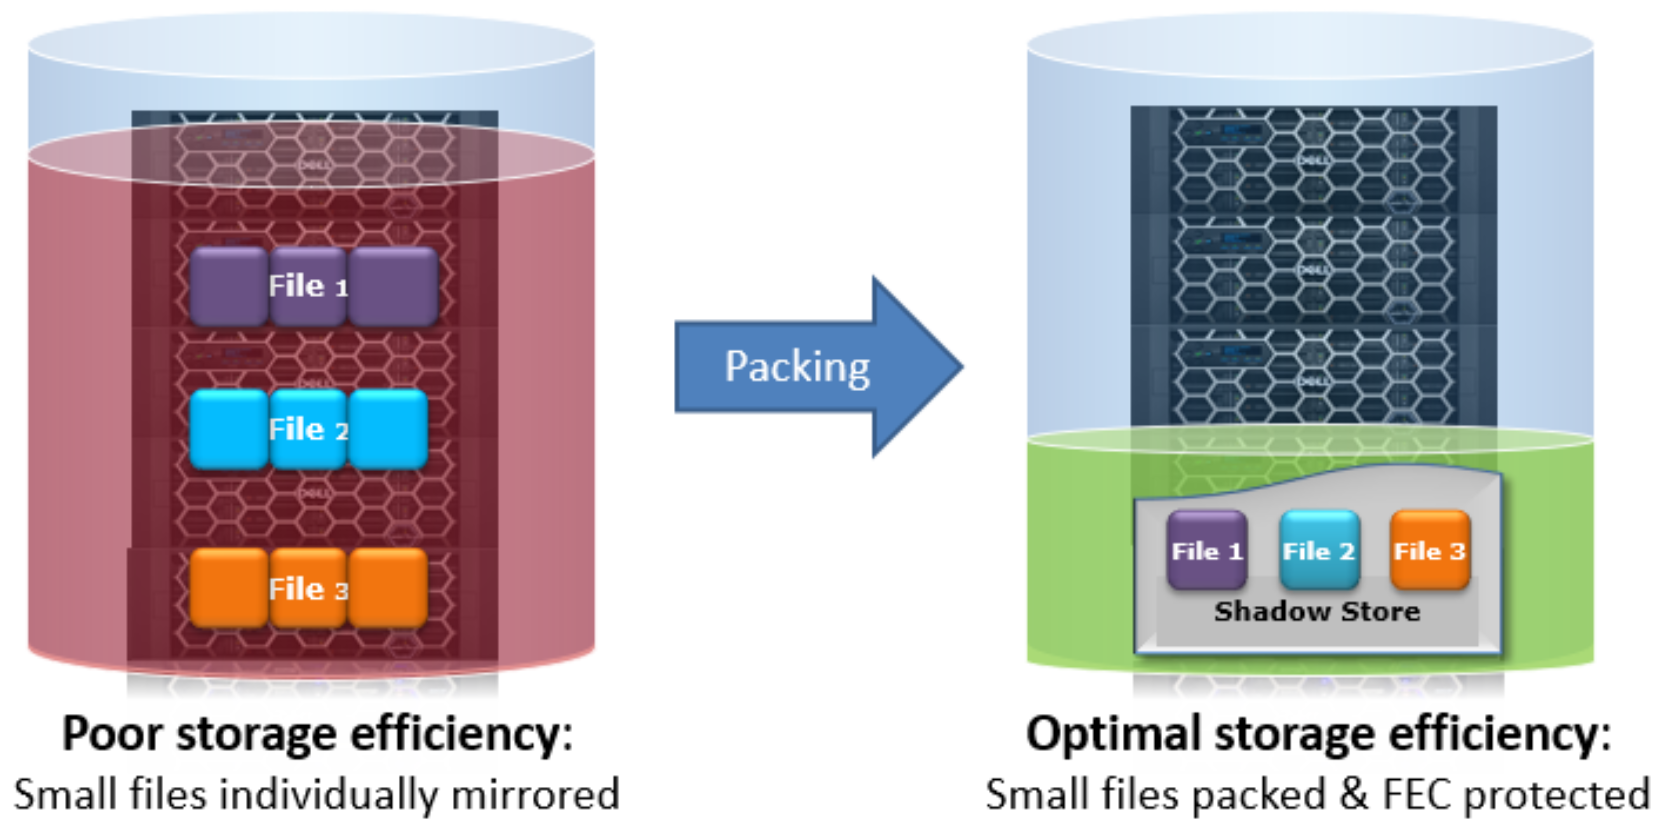 Illustration depicting the OneFS small file containerization process, where files are efficiently packed into shadow stores and FEC protected, rather than mirrored.